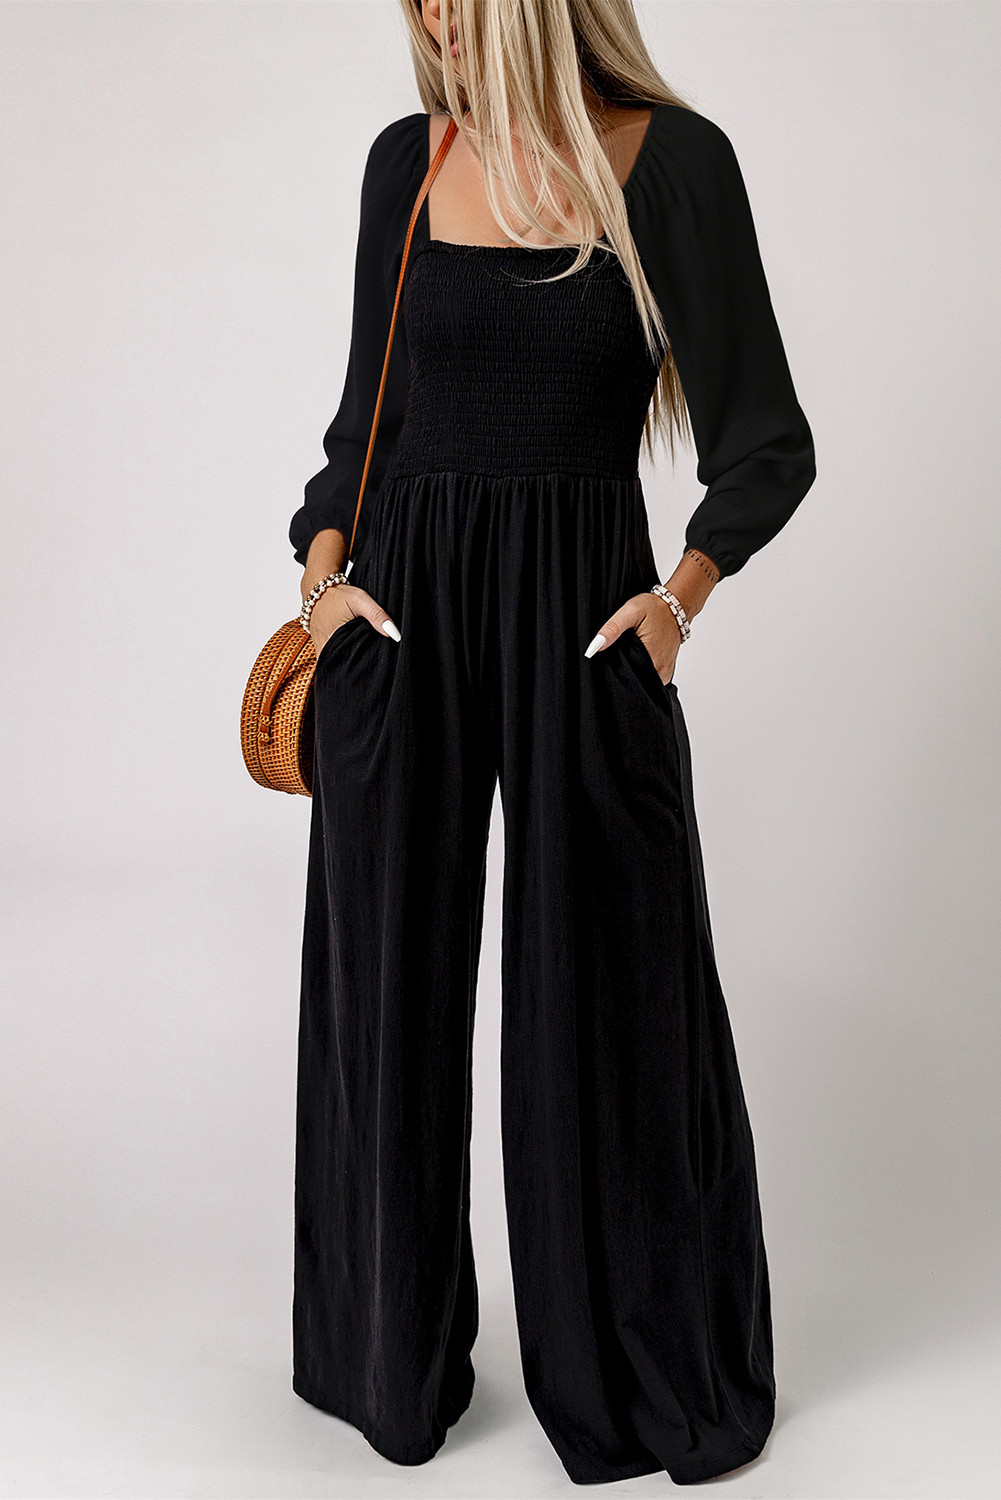 Women's Jumpsuits & Rompers | Rompers Online | SHEIN USA